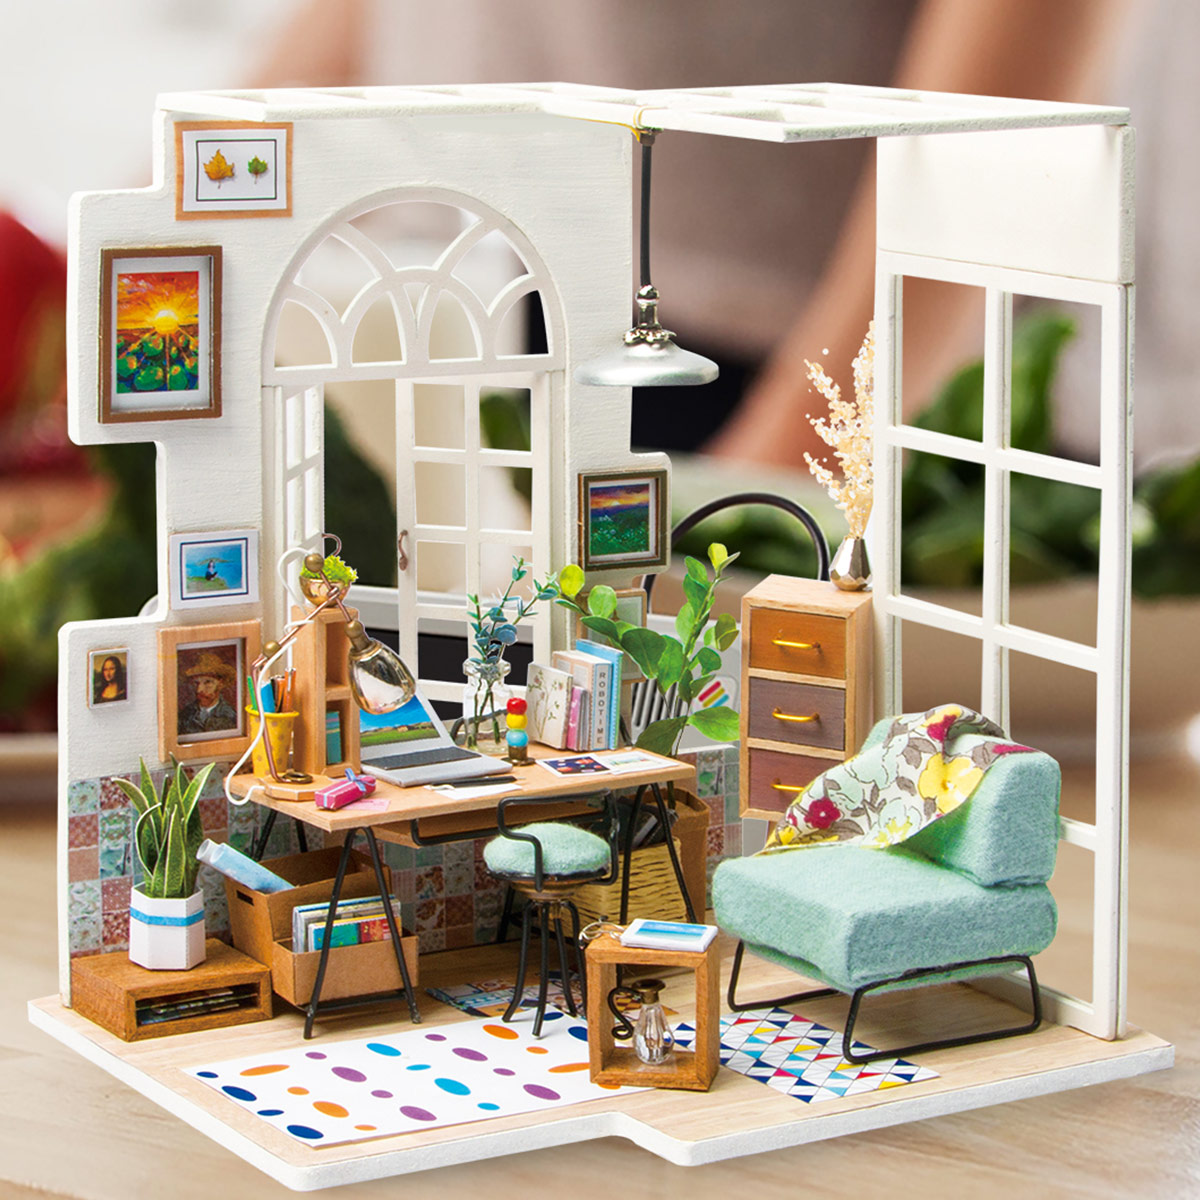 DIY Sewing Room Gift for Girls Rolife Dolls House Furniture and Accessories LED 